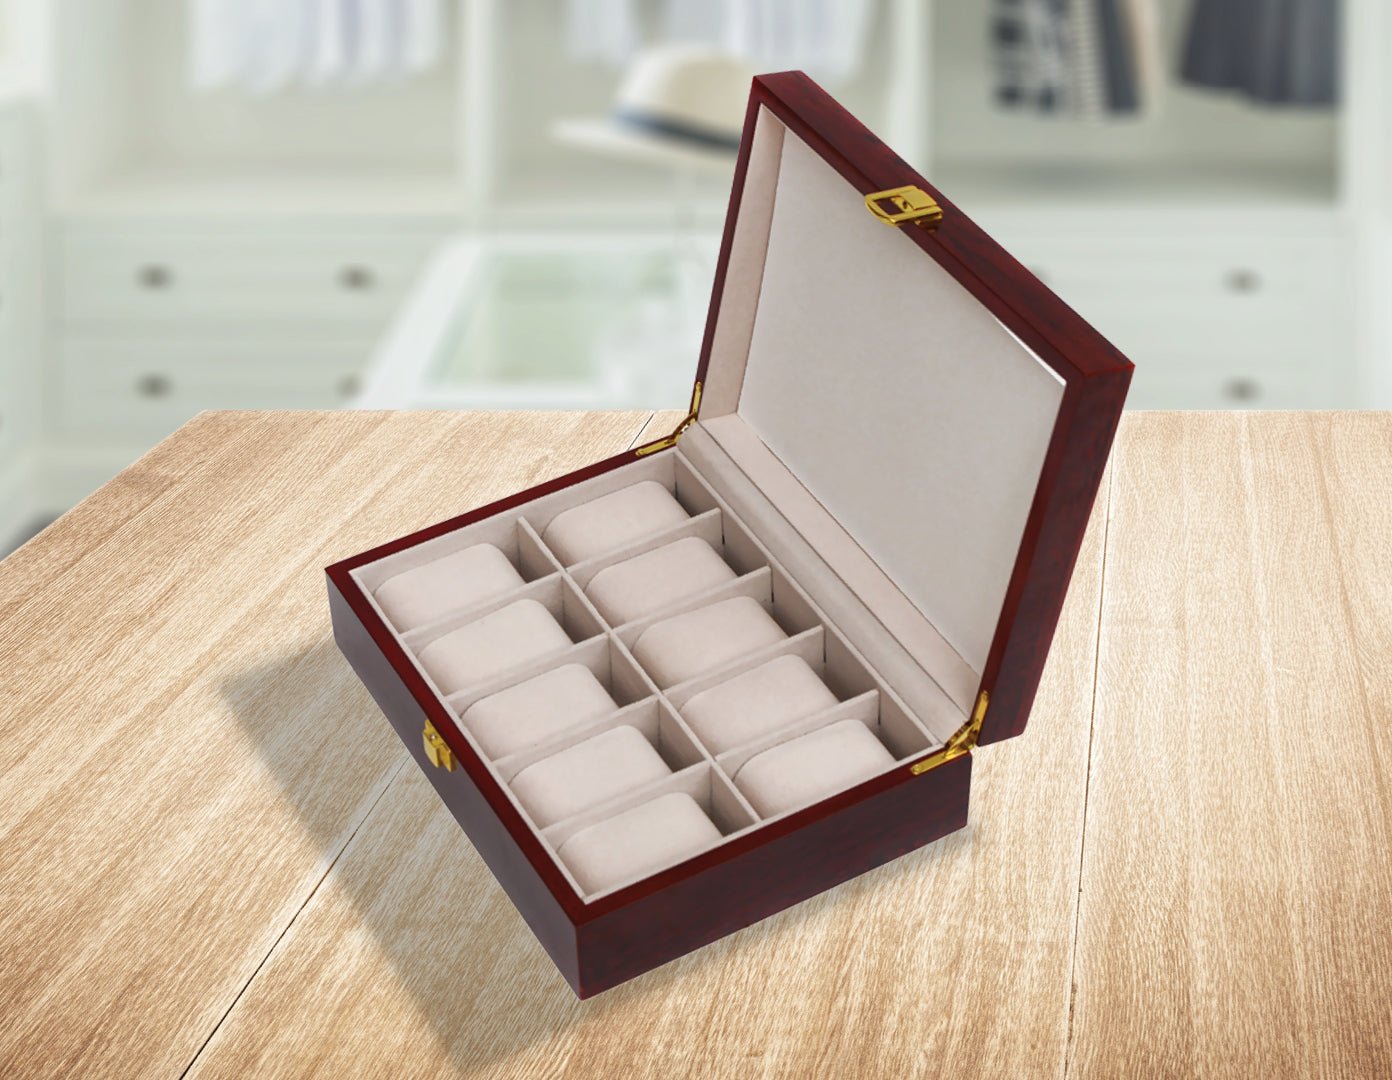 10 Grids Wooden Watch Case Glass Jewellery Storage Holder Box Wood Display - Shopping Planet